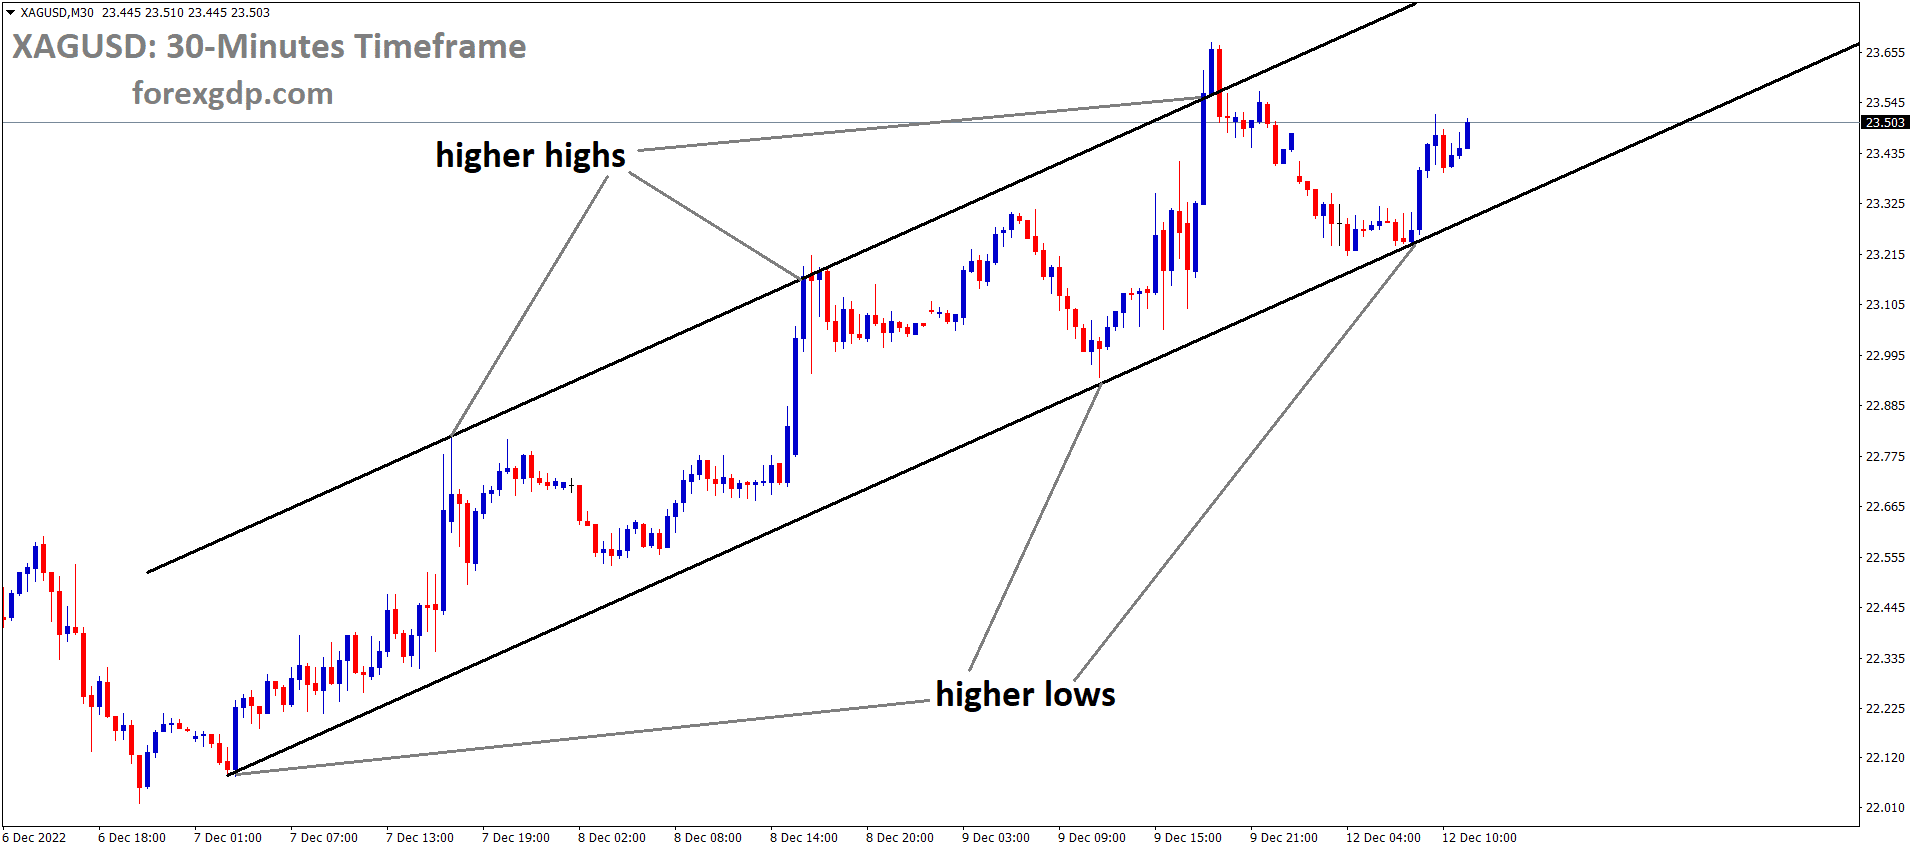 XAGUSD is moving in an Ascending channel and the market has rebounded from the higher low area of the channel